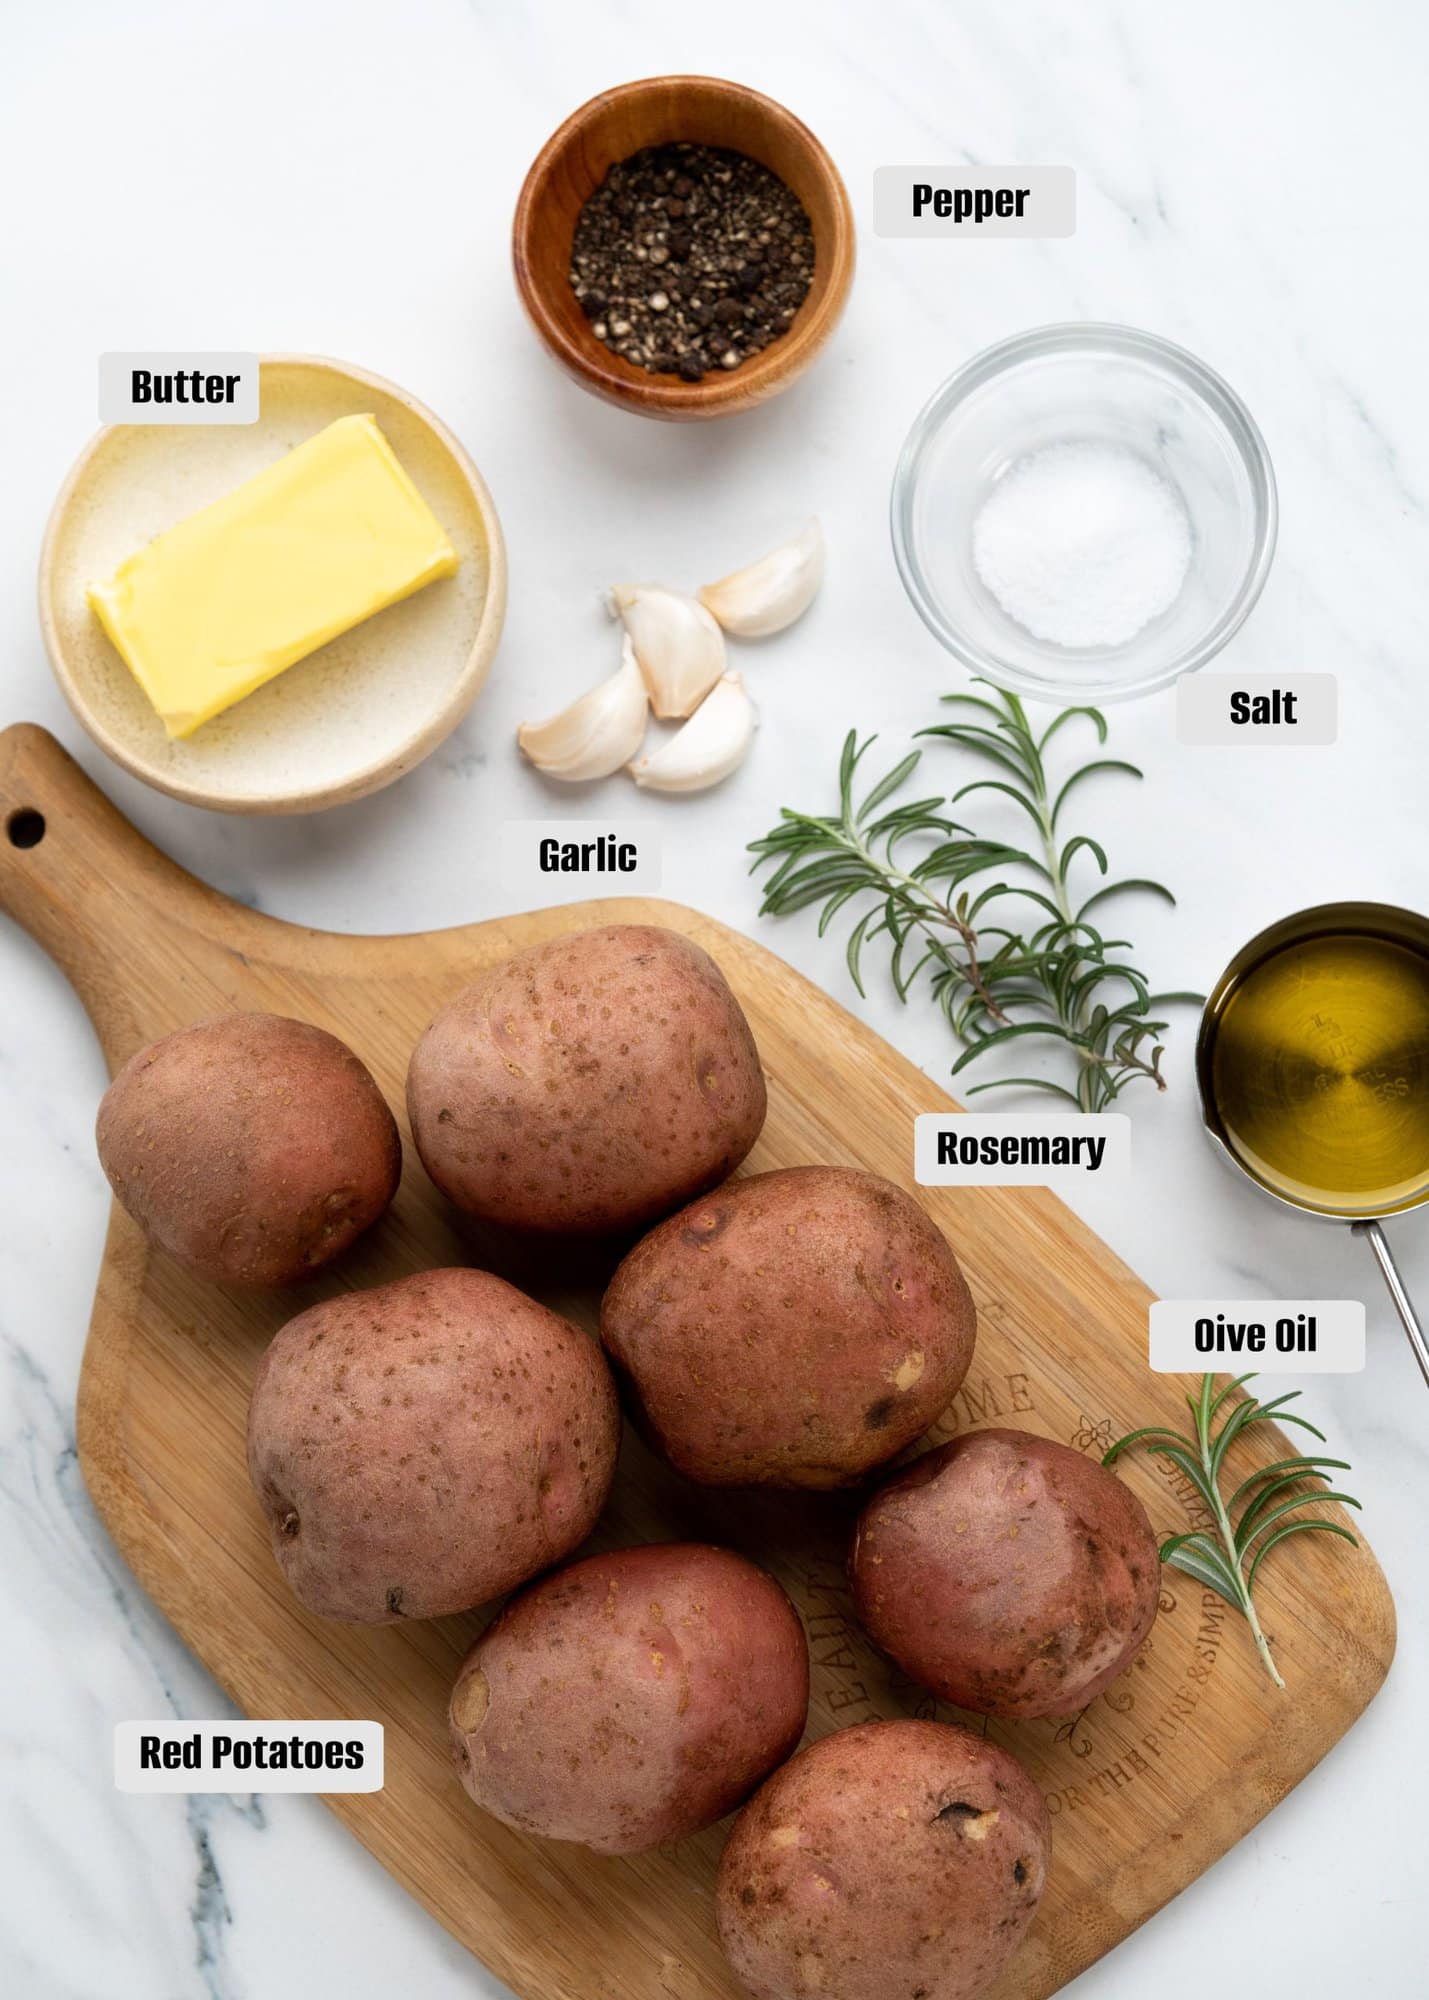 Ingredients for roasted red potatoes.